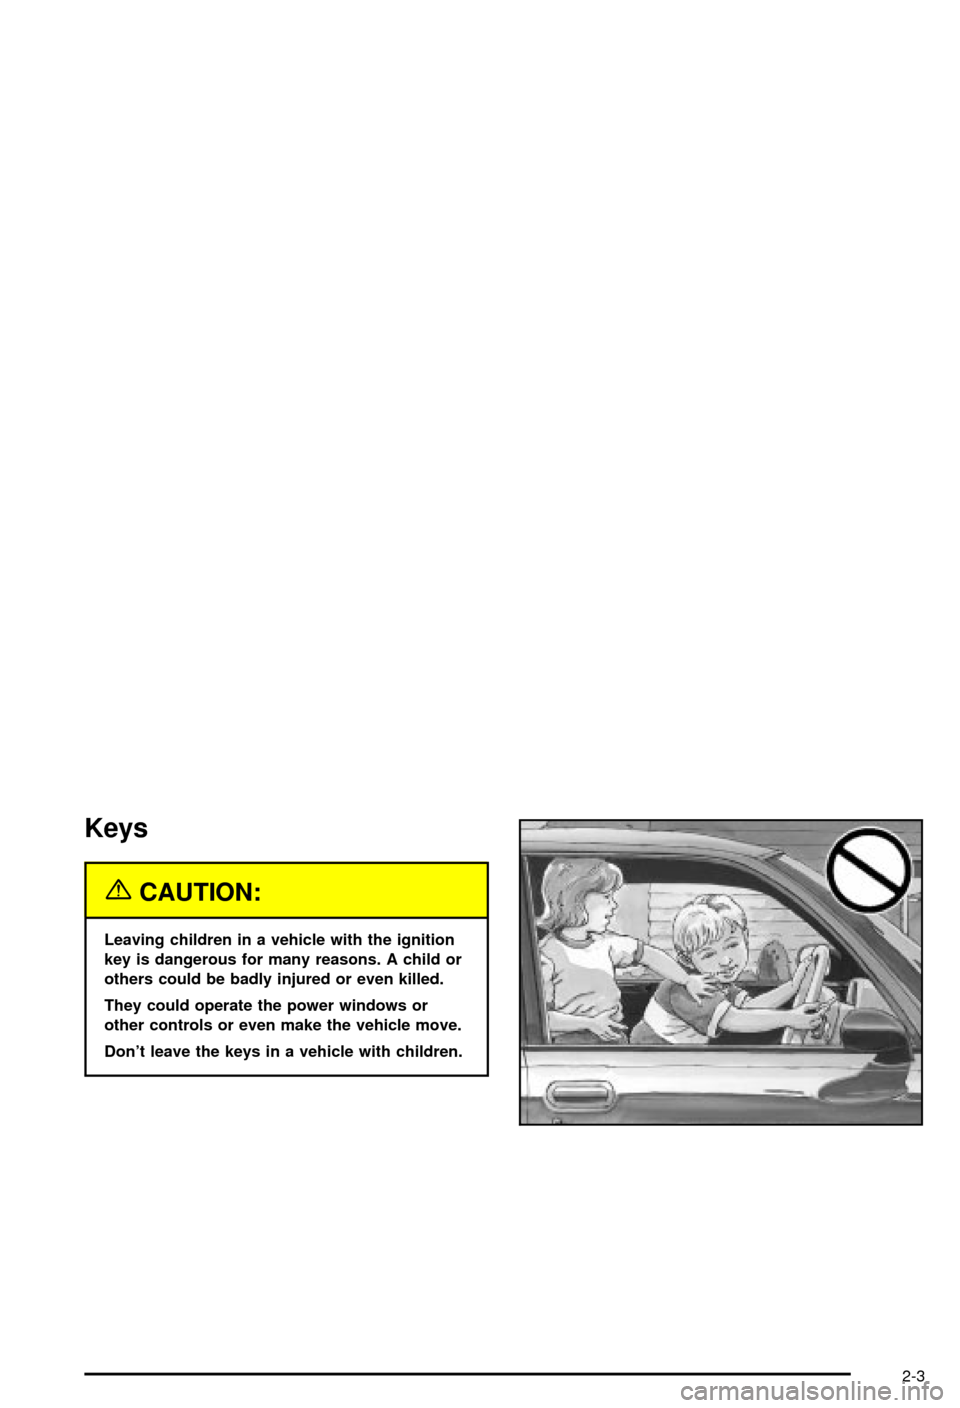 CHEVROLET AVALANCHE 2003 1.G Manual PDF Keys
{CAUTION:
Leaving children in a vehicle with the ignition
key is dangerous for many reasons. A child or
others could be badly injured or even killed.
They could operate the power windows or
other